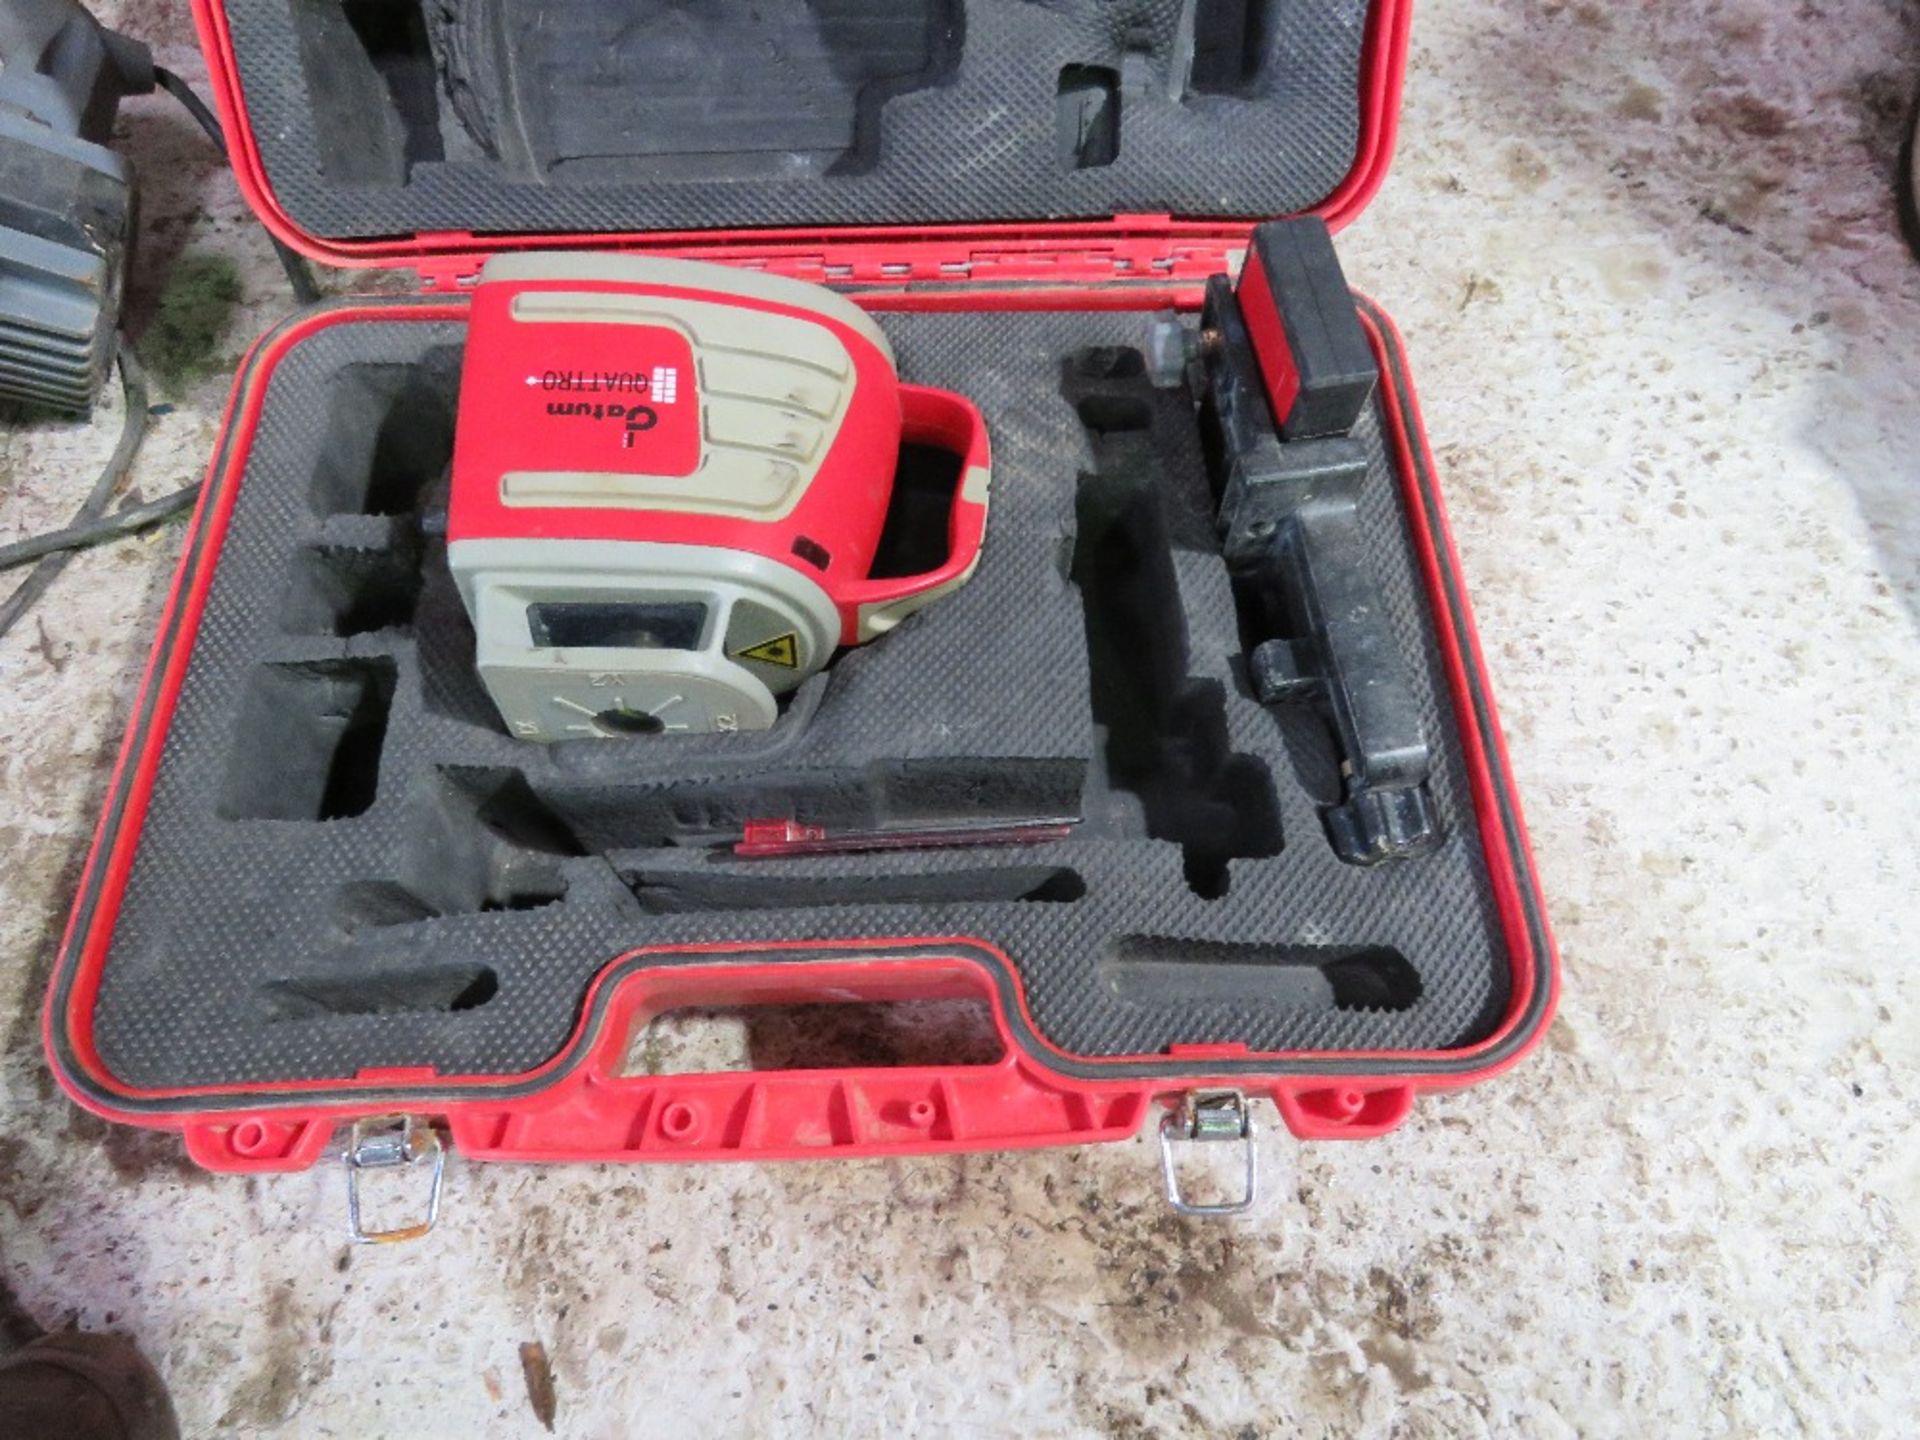 DATUM ROTARY LASER LEVEL IN A CASE. - Image 4 of 4